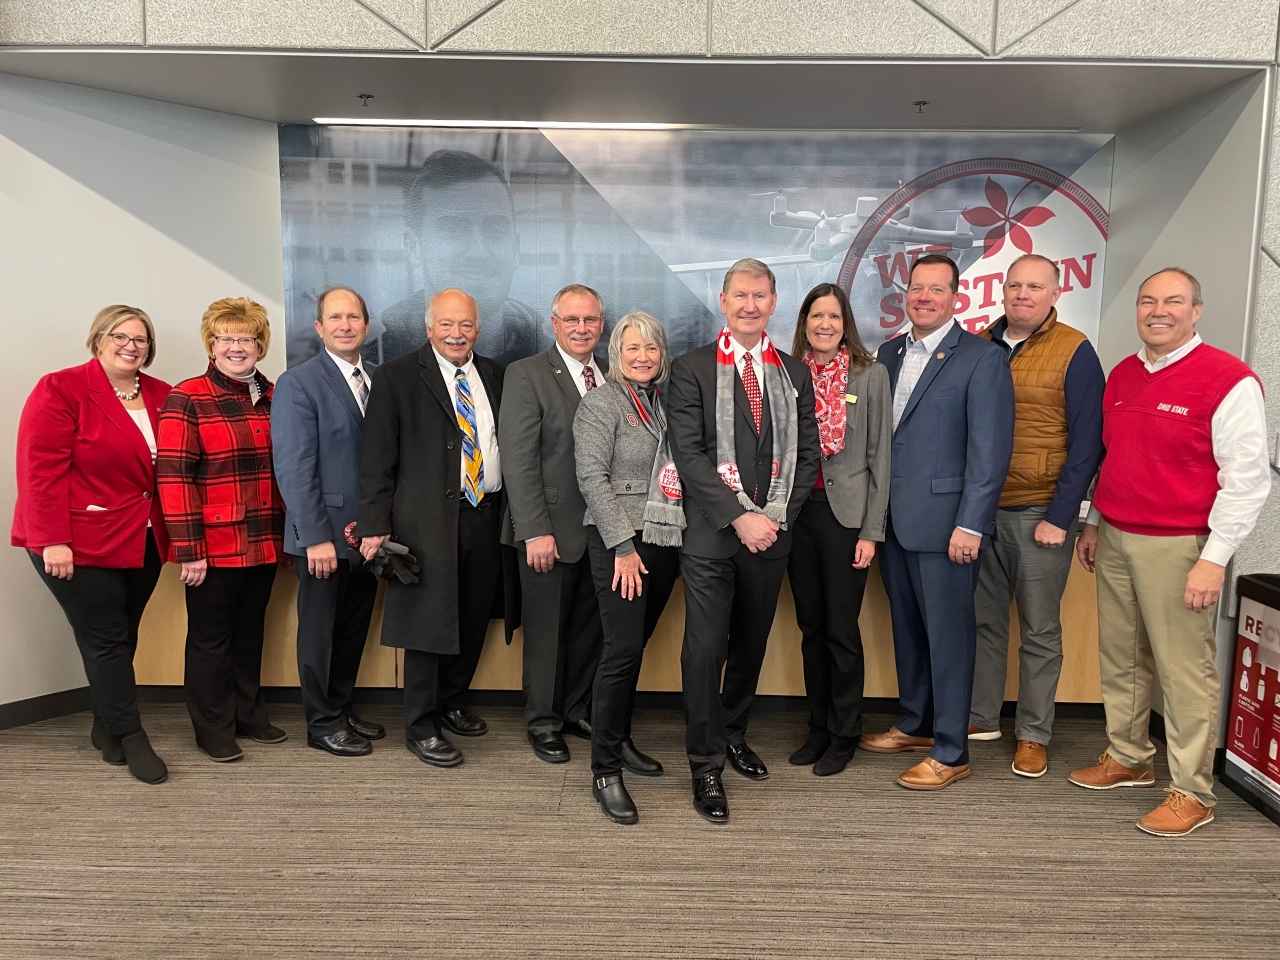 Representative Richardson joined members of the Ohio General Assembly at the groundbreaking of the Ohio State University's Multispecies Animal Learning Center.